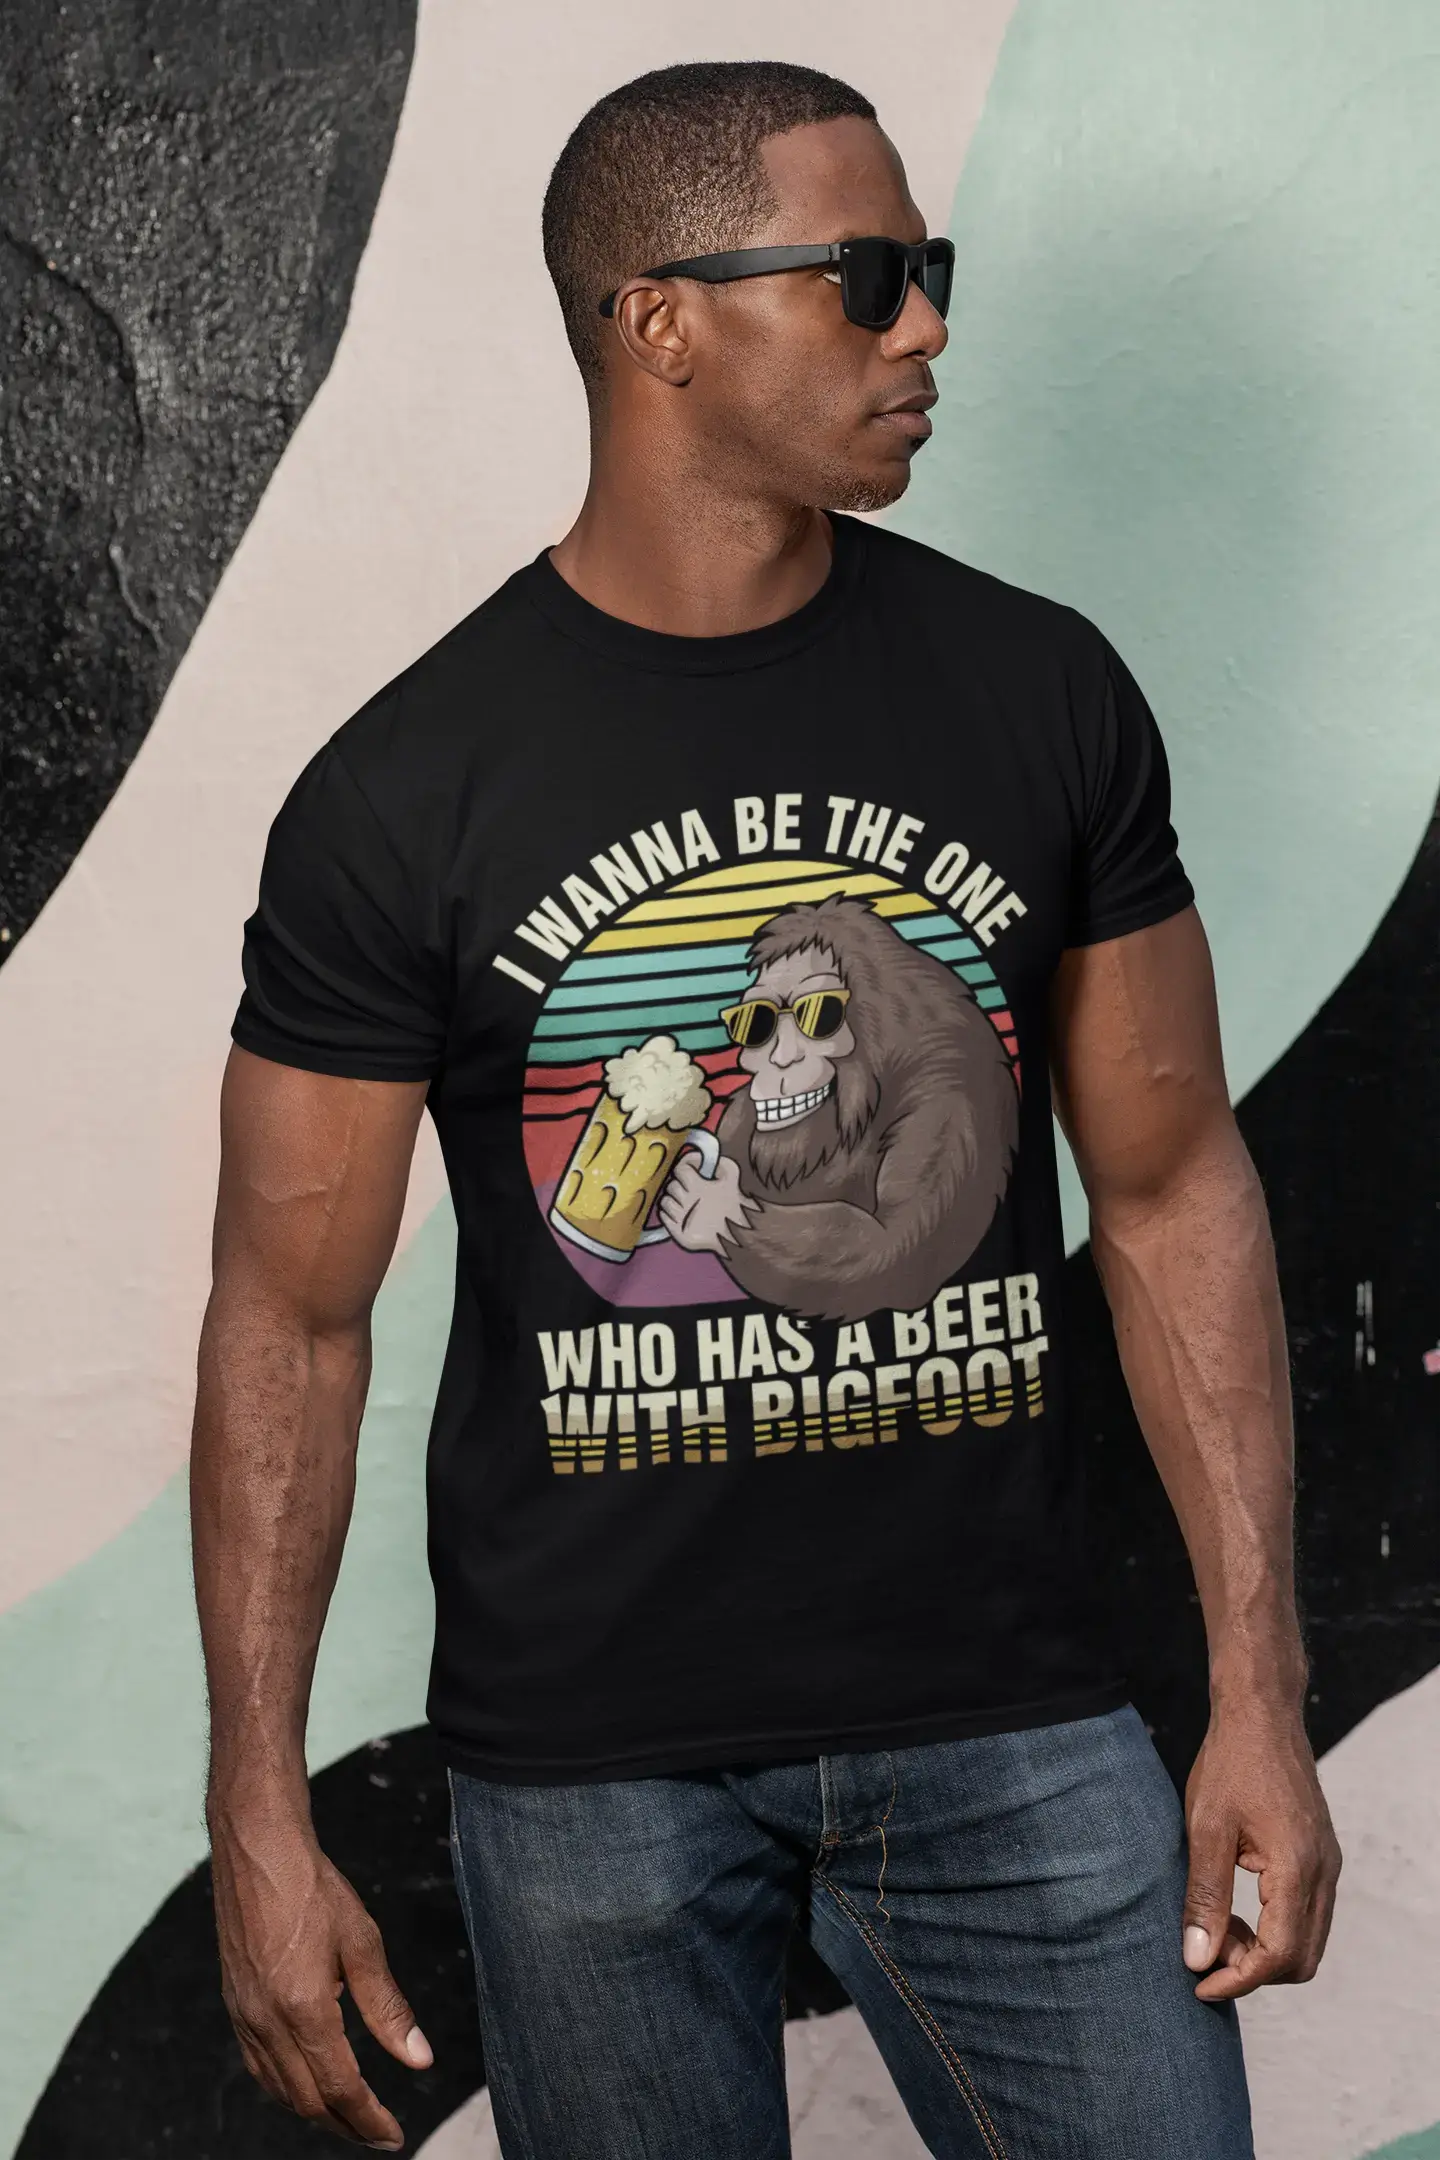 ULTRABASIC Herren-Neuheits-T-Shirt „I Wanna Be the One Who Haves a Beer With Bigfoot“ – Lustiges Bierliebhaber-T-Shirt